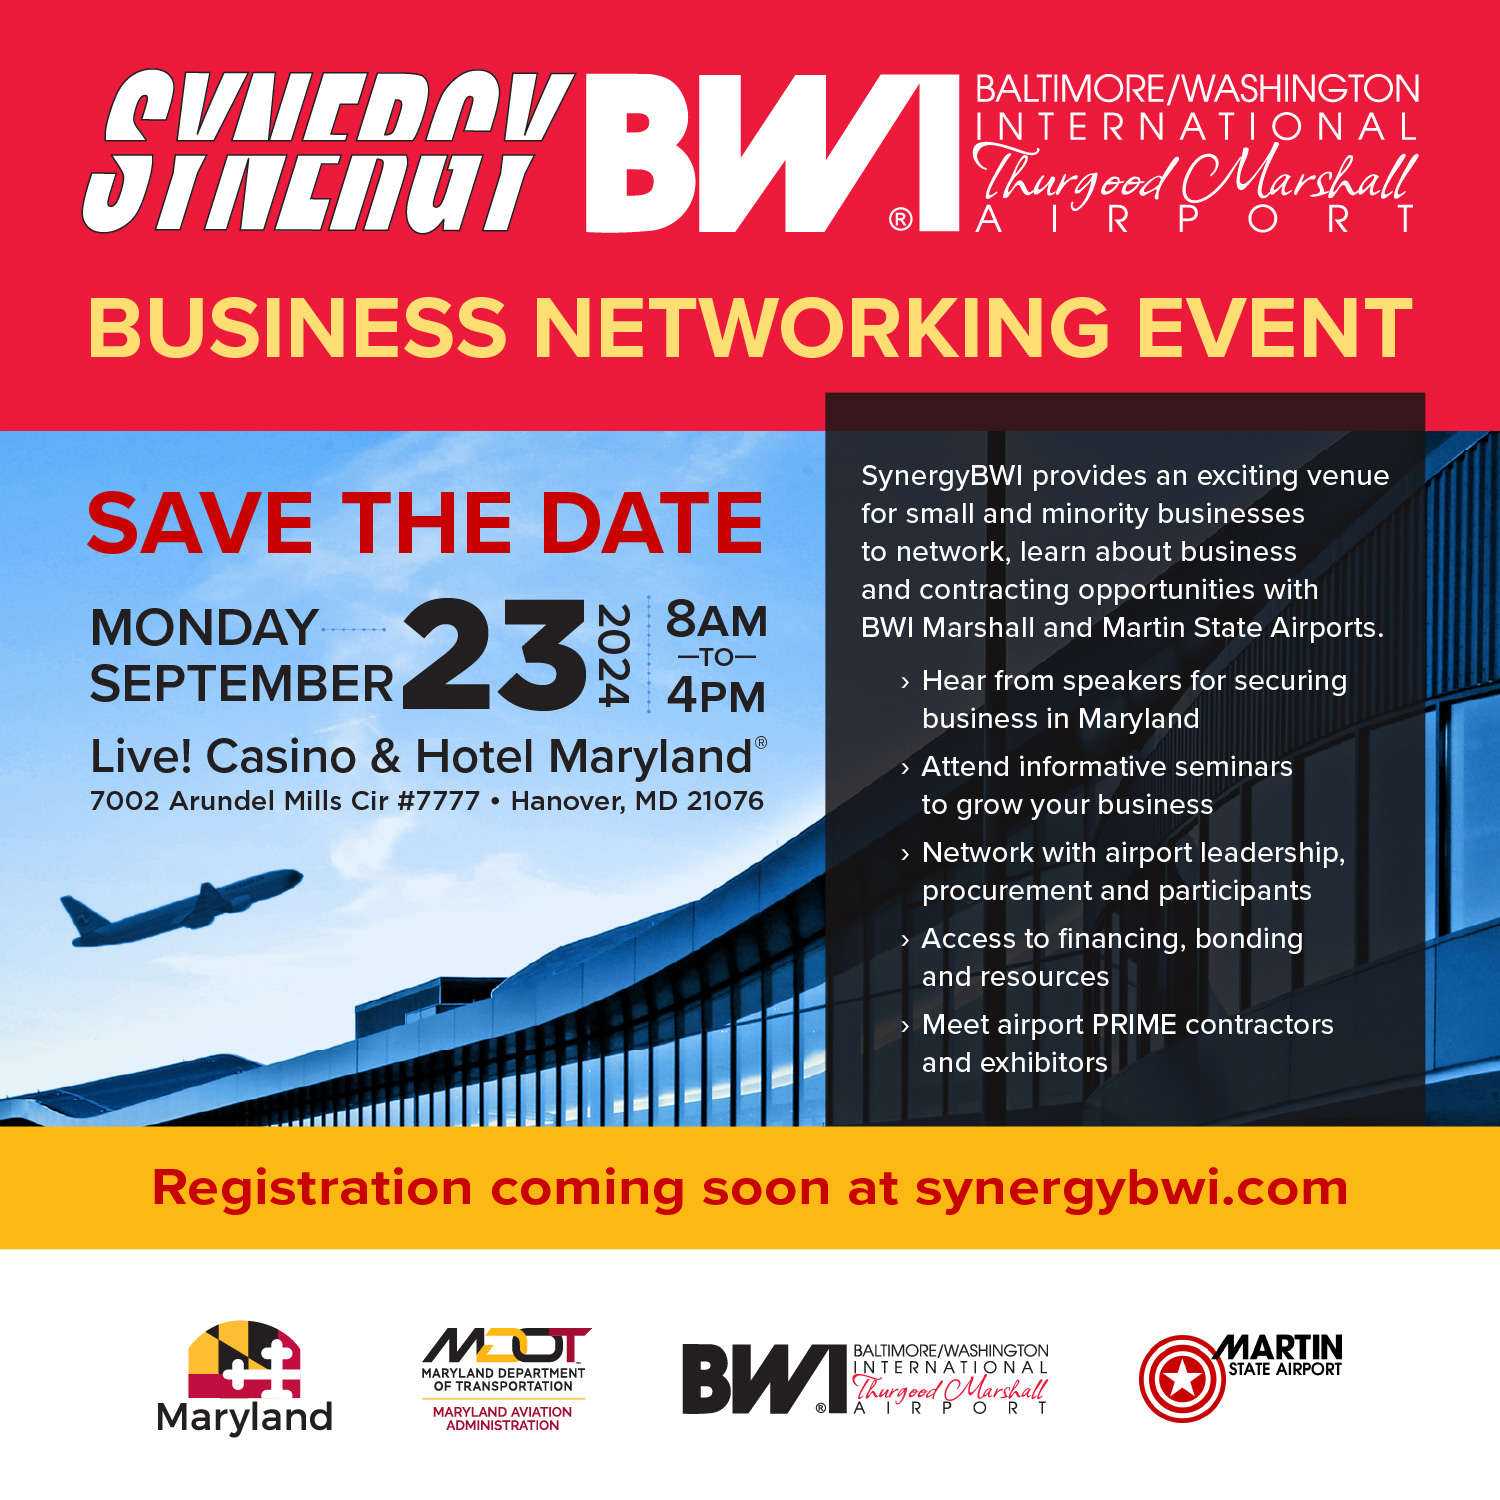 SynergyBWI Event Details